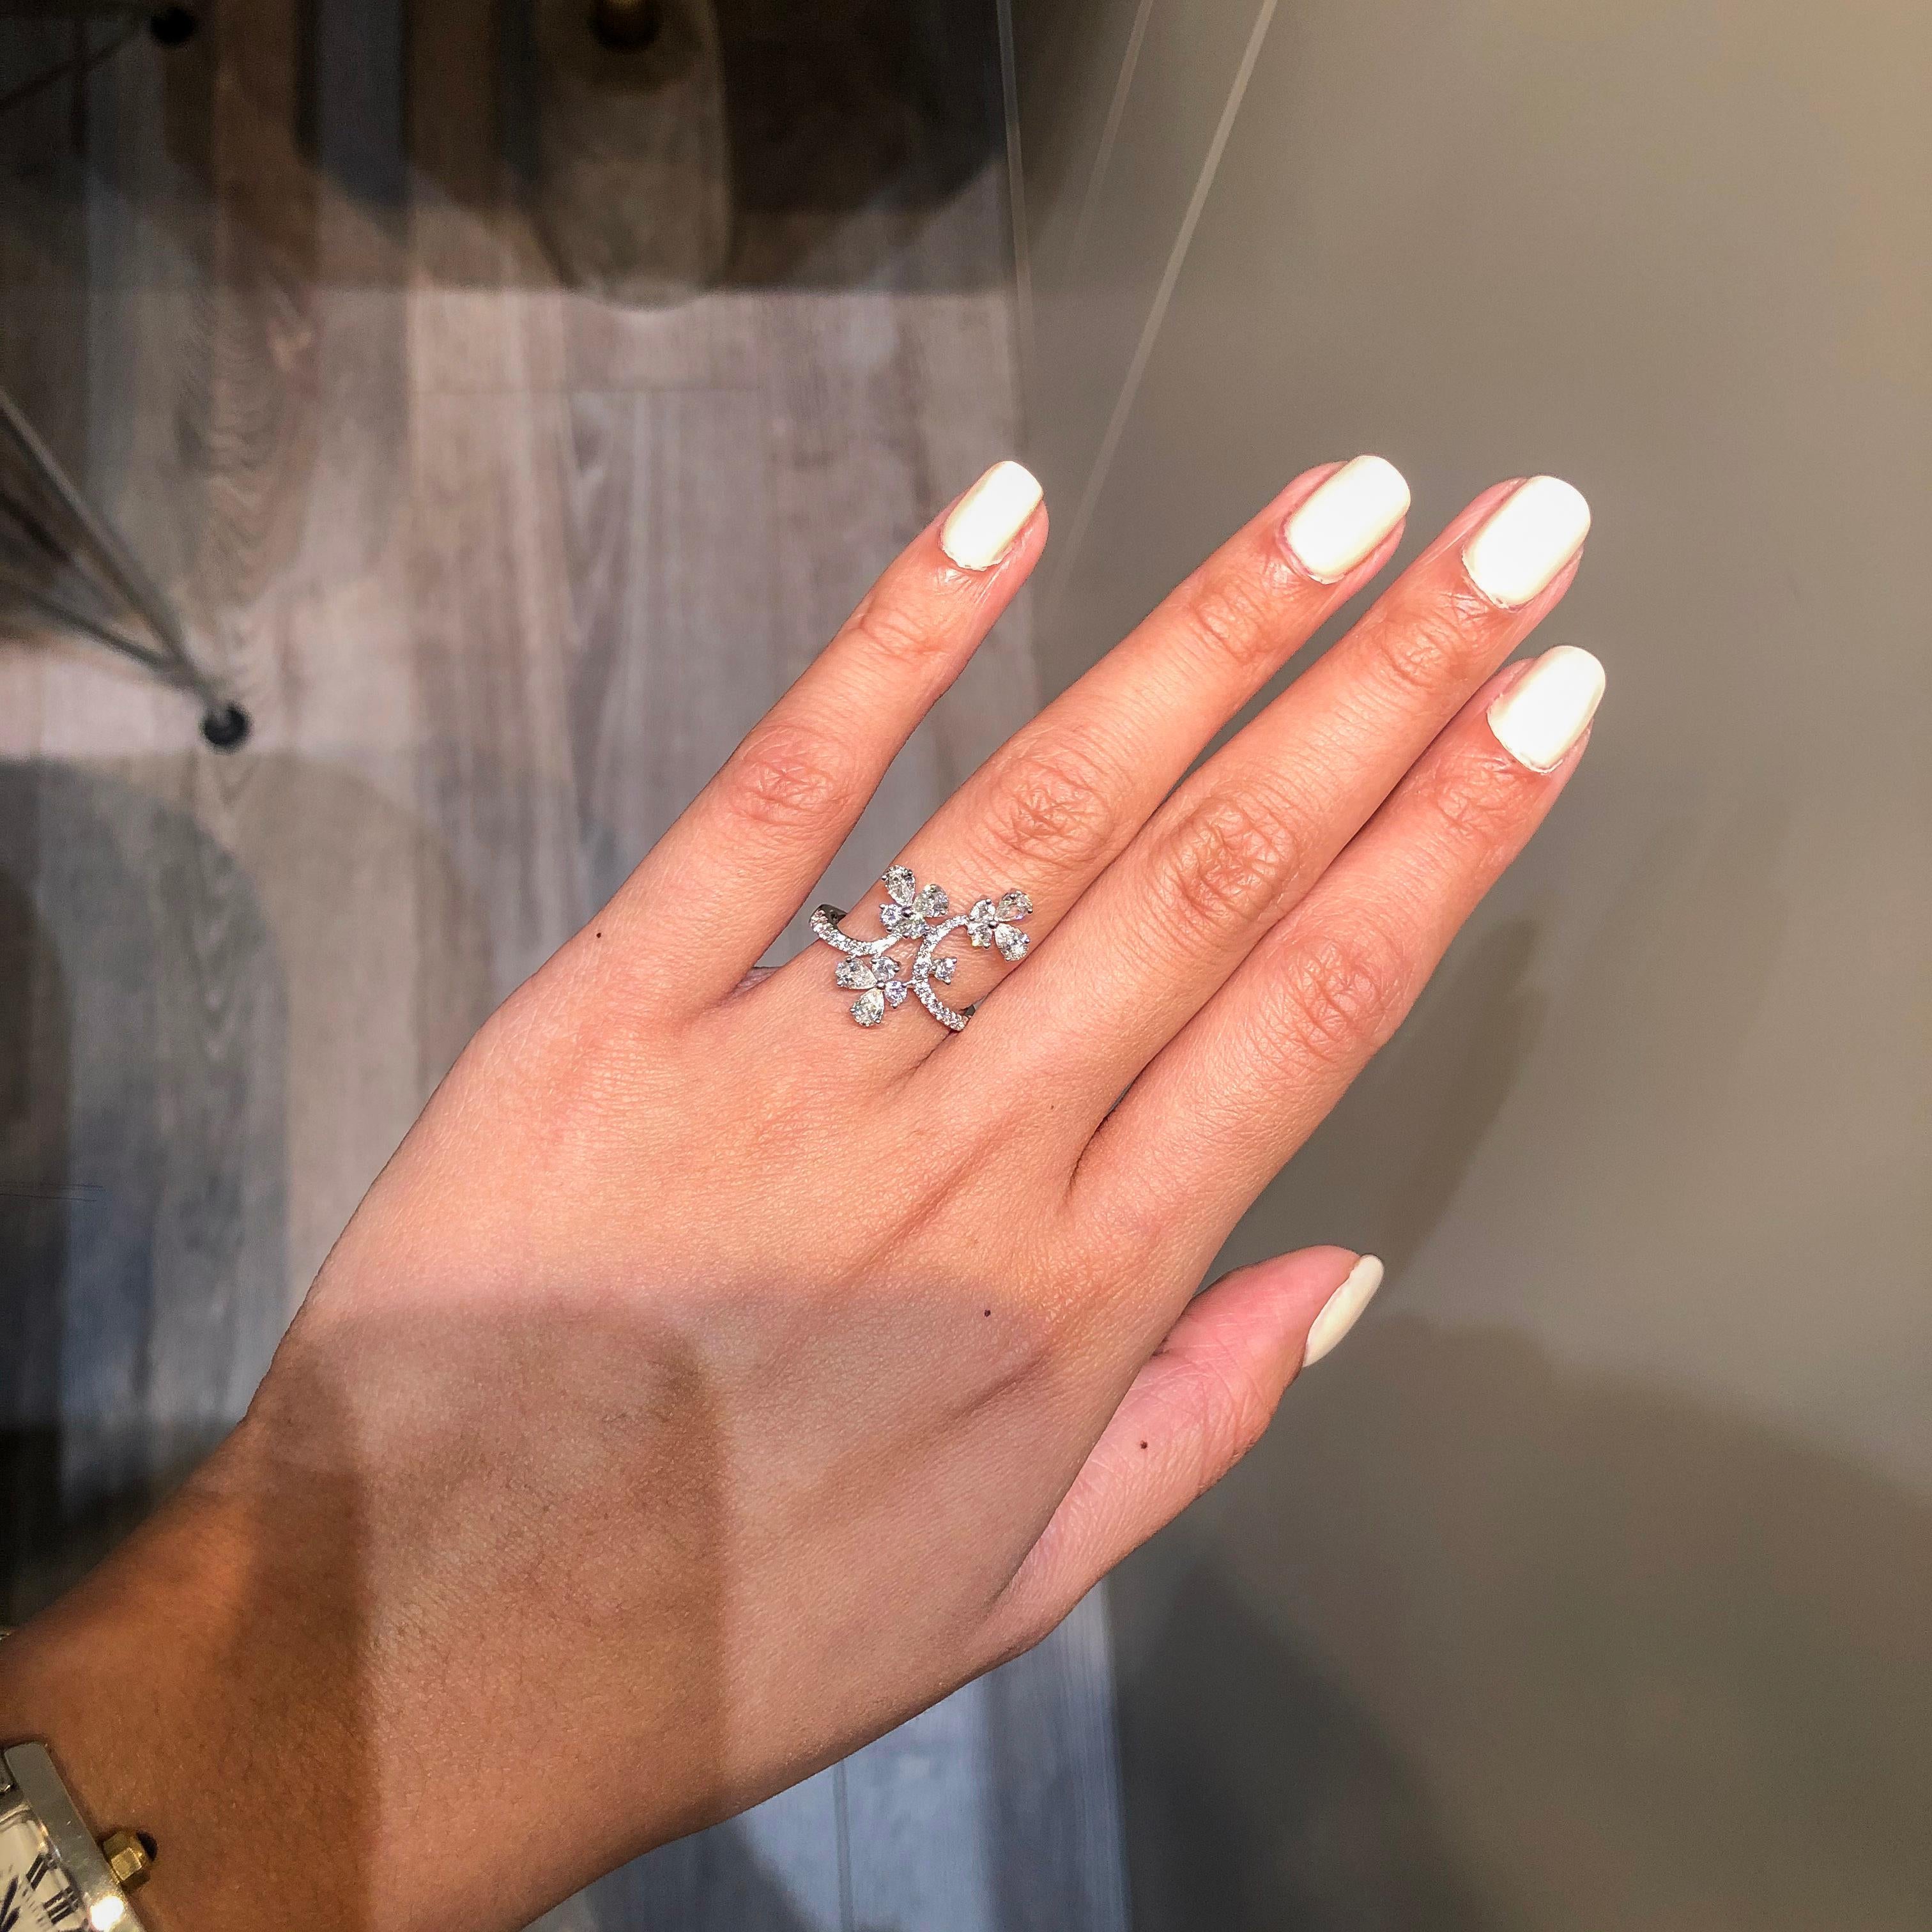 This is an incredibly gorgeous ring featuring three fluttering butterflies in an accented 18k white gold mounting. Each butterfly is set with 2 pear shaped diamonds and 2 round diamonds. Tapered shank accented with more sparkling round diamonds.